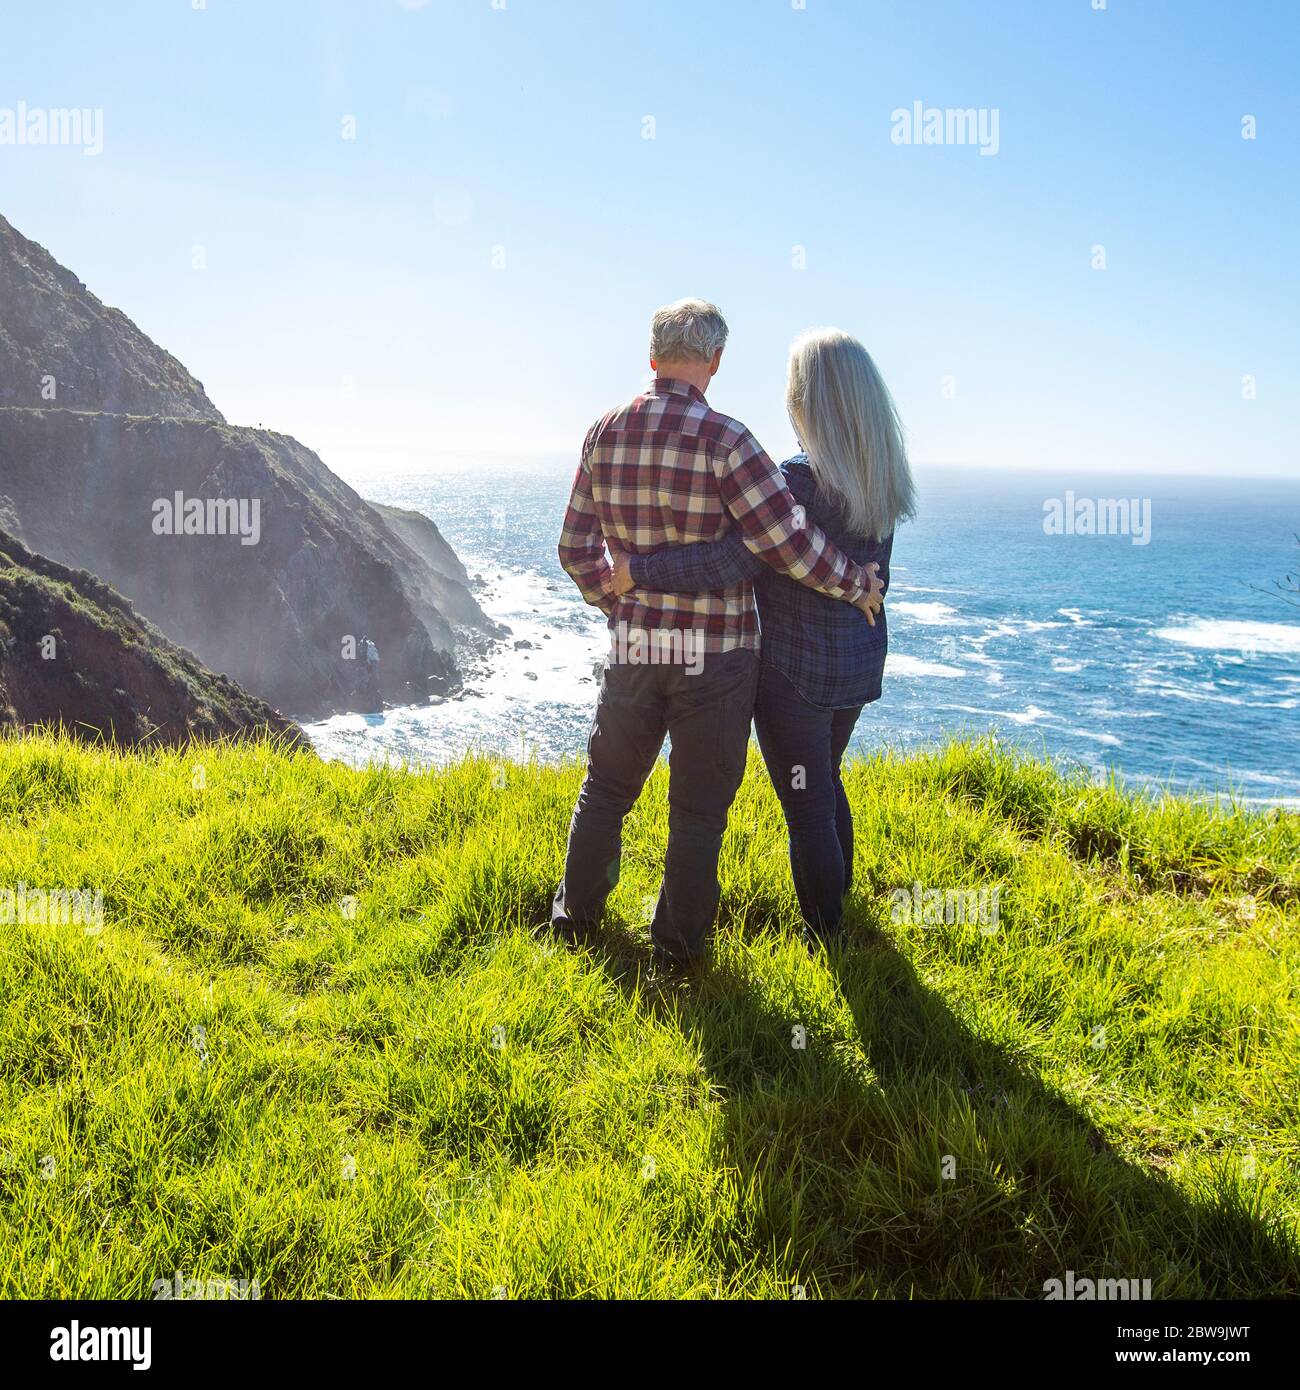 USA, California, Big Sur, Elderly couple watching ocean from grassy cliff Stock Photo